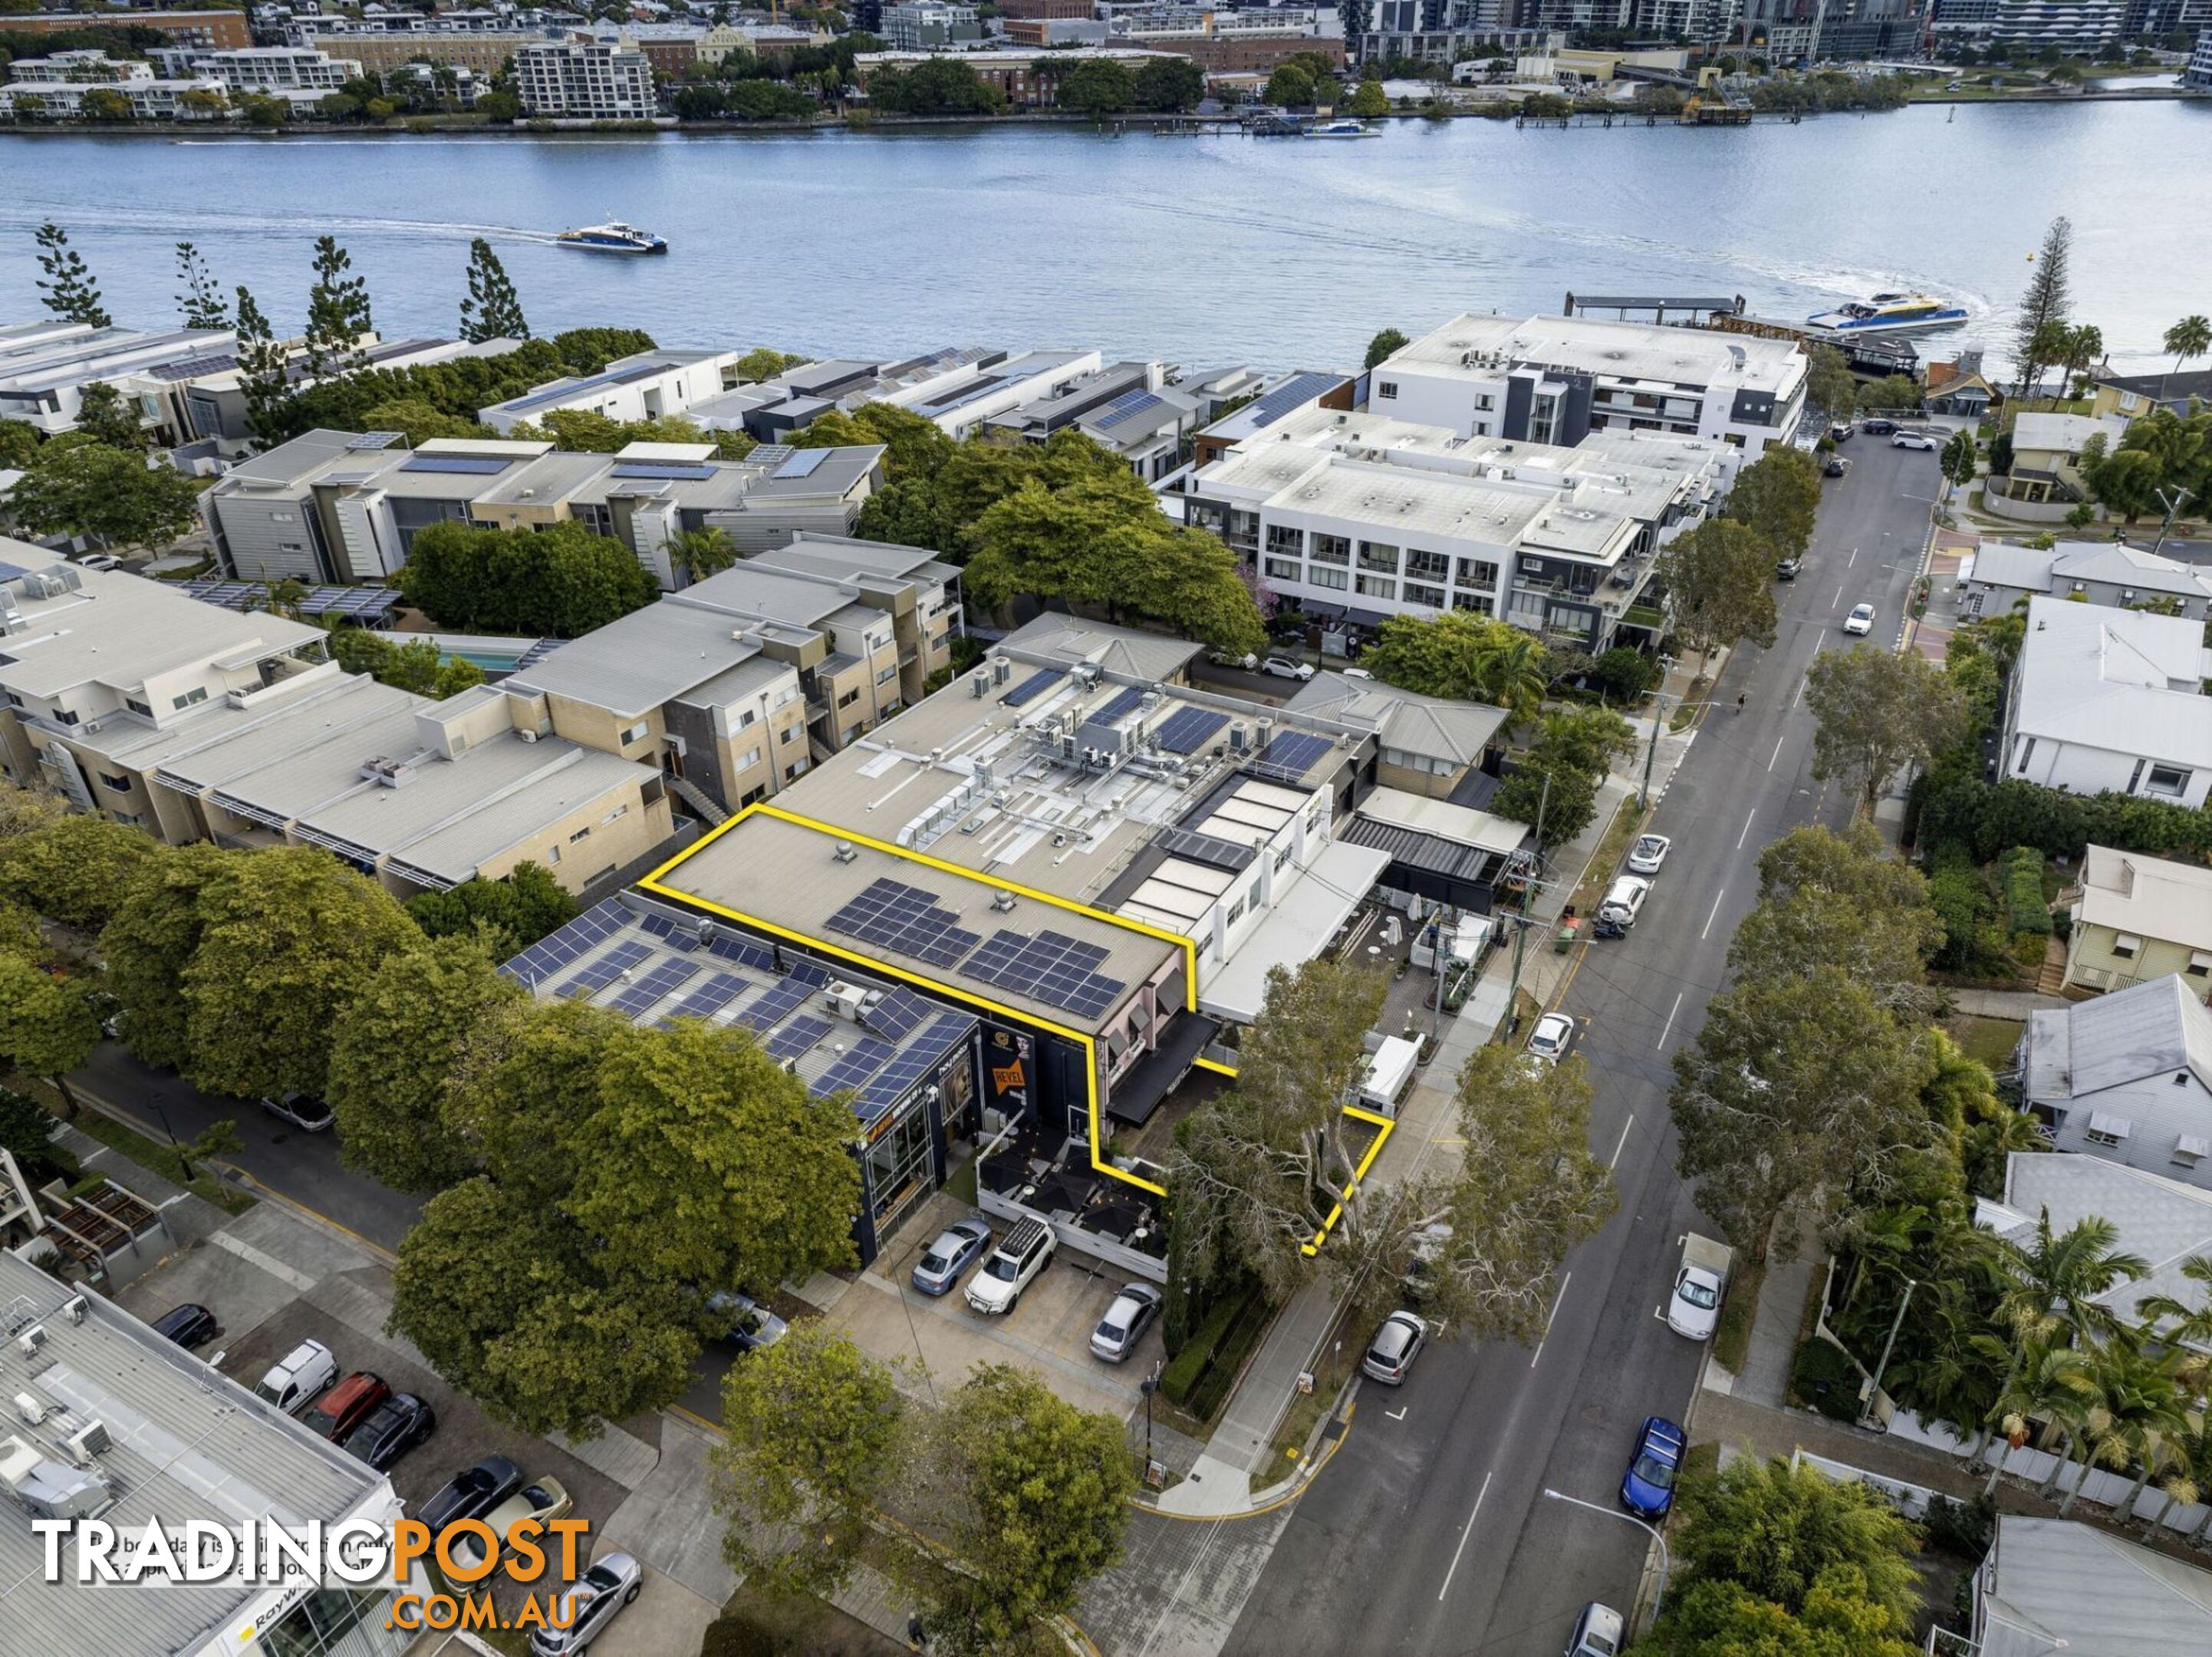 Oxford st Bulimba Multiple Use    from 50m2 to 100m2 Level 1/39 Oxford Street Bulimba QLD 4171